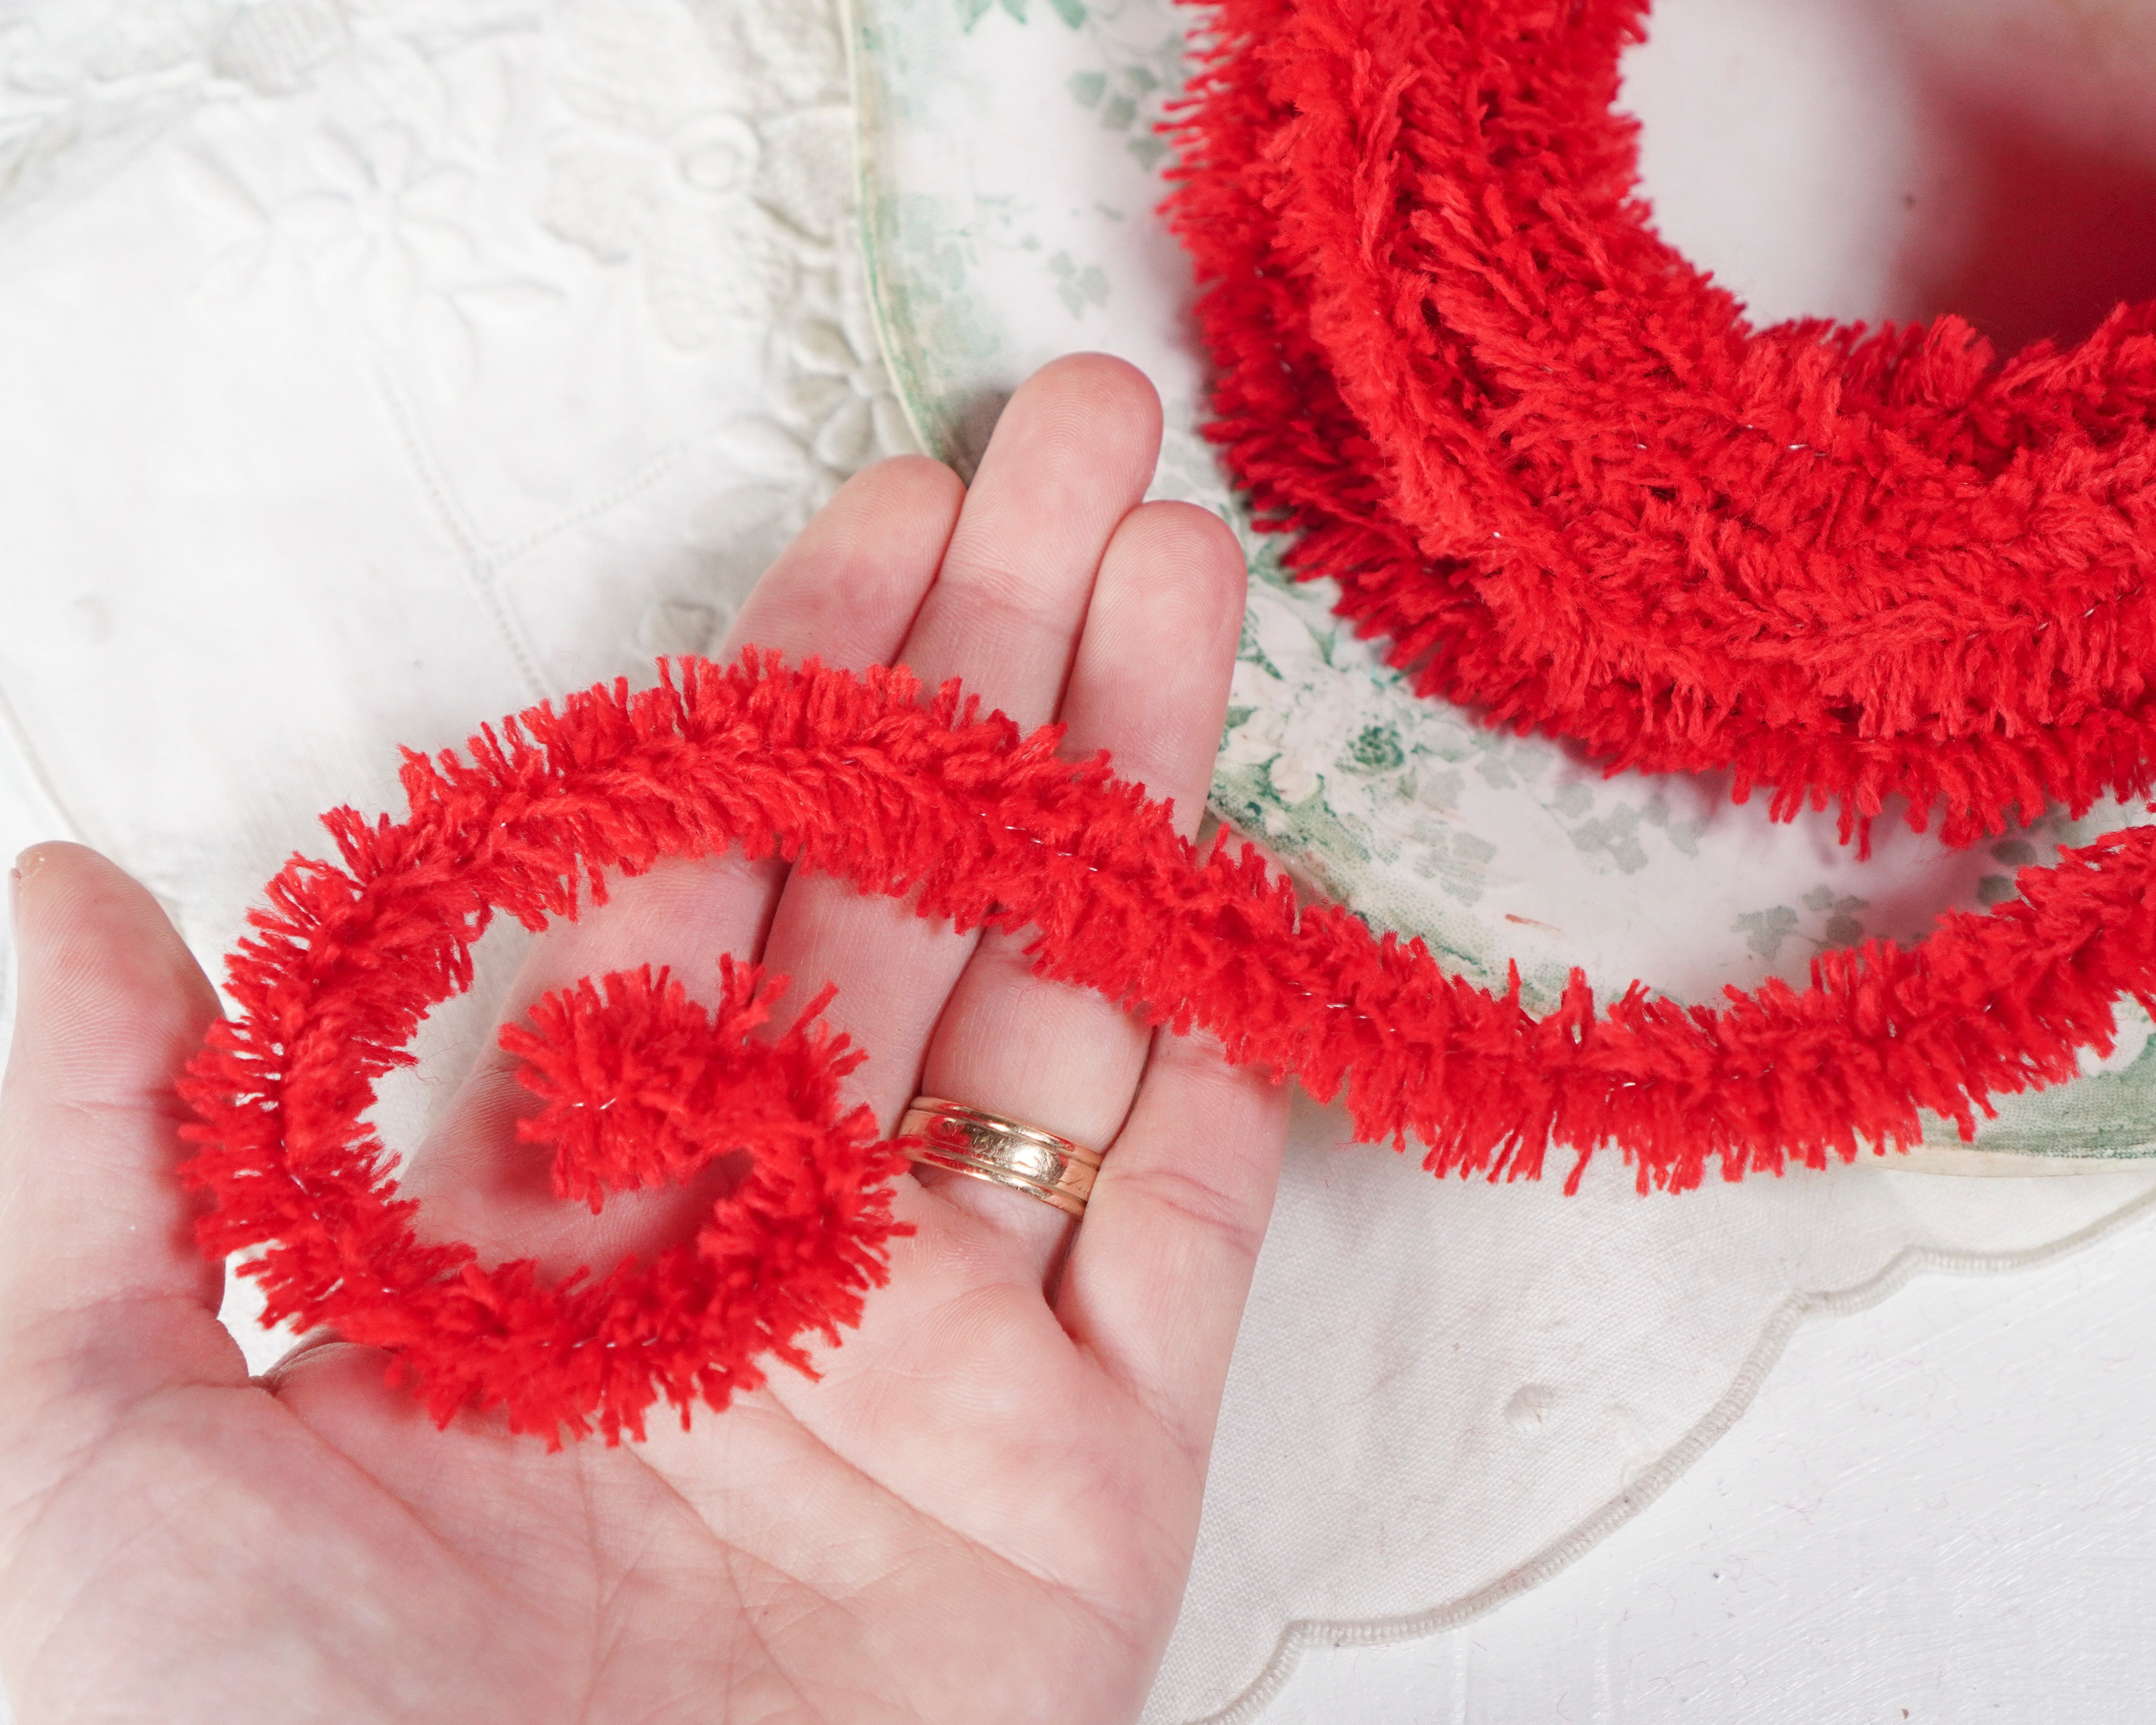 Wired Yarn Trim - Fluffy Christmas Red Yarn Fur Craft Cord, 3 Yds. – Smile  Mercantile Craft Co.